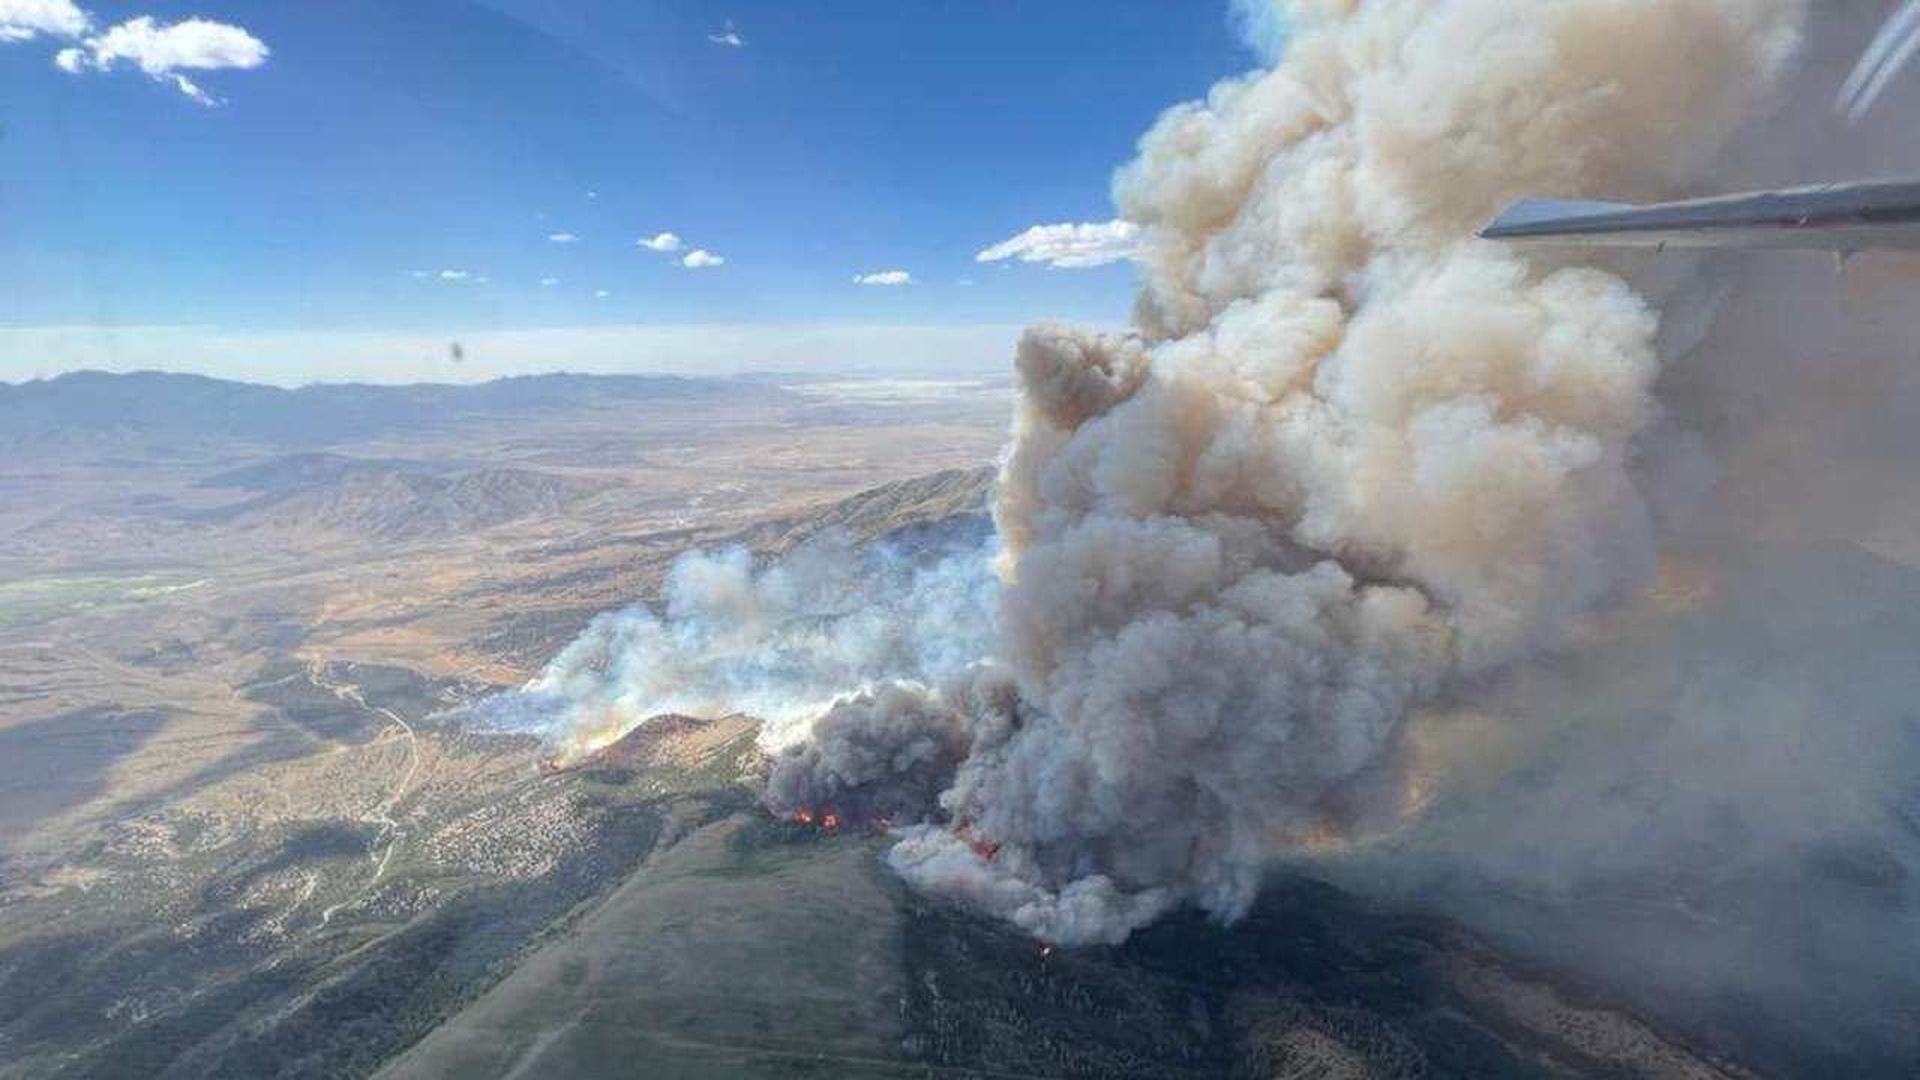 The Jacob City Fire had burned about 4,000 acres as of Sunday. Photo courtesy of Utahfireinfo.gov.